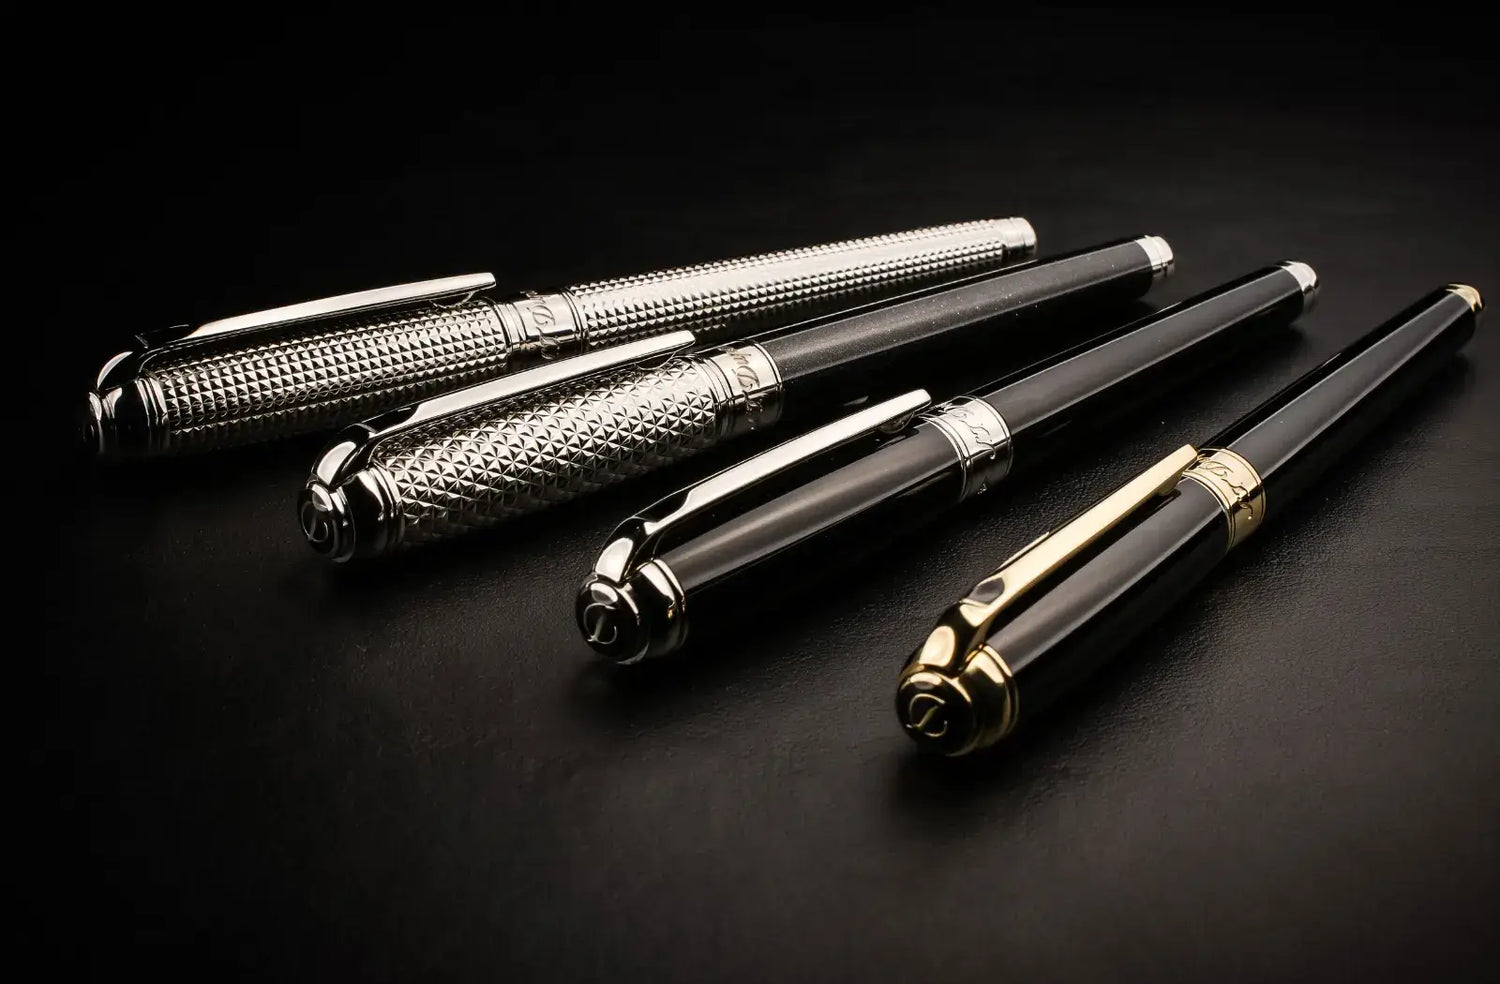 4 S.T. Dupont Line D pens with caps on. Front to back, black lacquer with gold accents, black lacquer with palladium accents, black lacquer with palladium guilloche and palladium guilloche pens